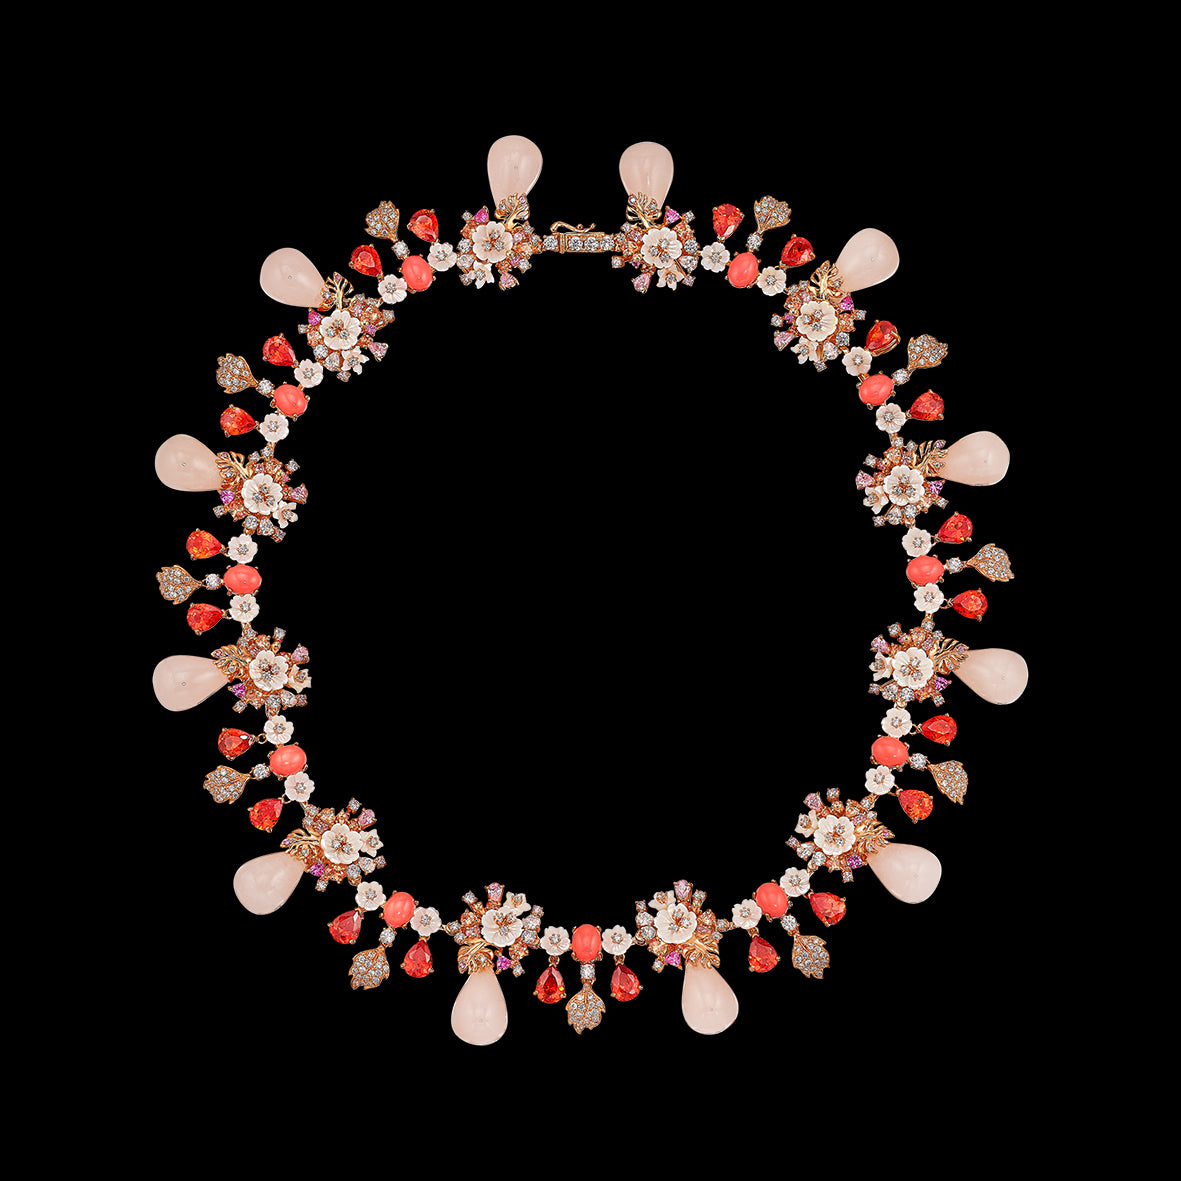 Coral Quartz Palm Paradise Necklace, Necklace, Anabela Chan Joaillerie - Fine jewelry with laboratory grown and created gemstones hand-crafted in the United Kingdom. Anabela Chan Joaillerie is the first fine jewellery brand in the world to champion laboratory-grown and created gemstones with high jewellery design, artisanal craftsmanship and a focus on ethical and sustainable innovations.